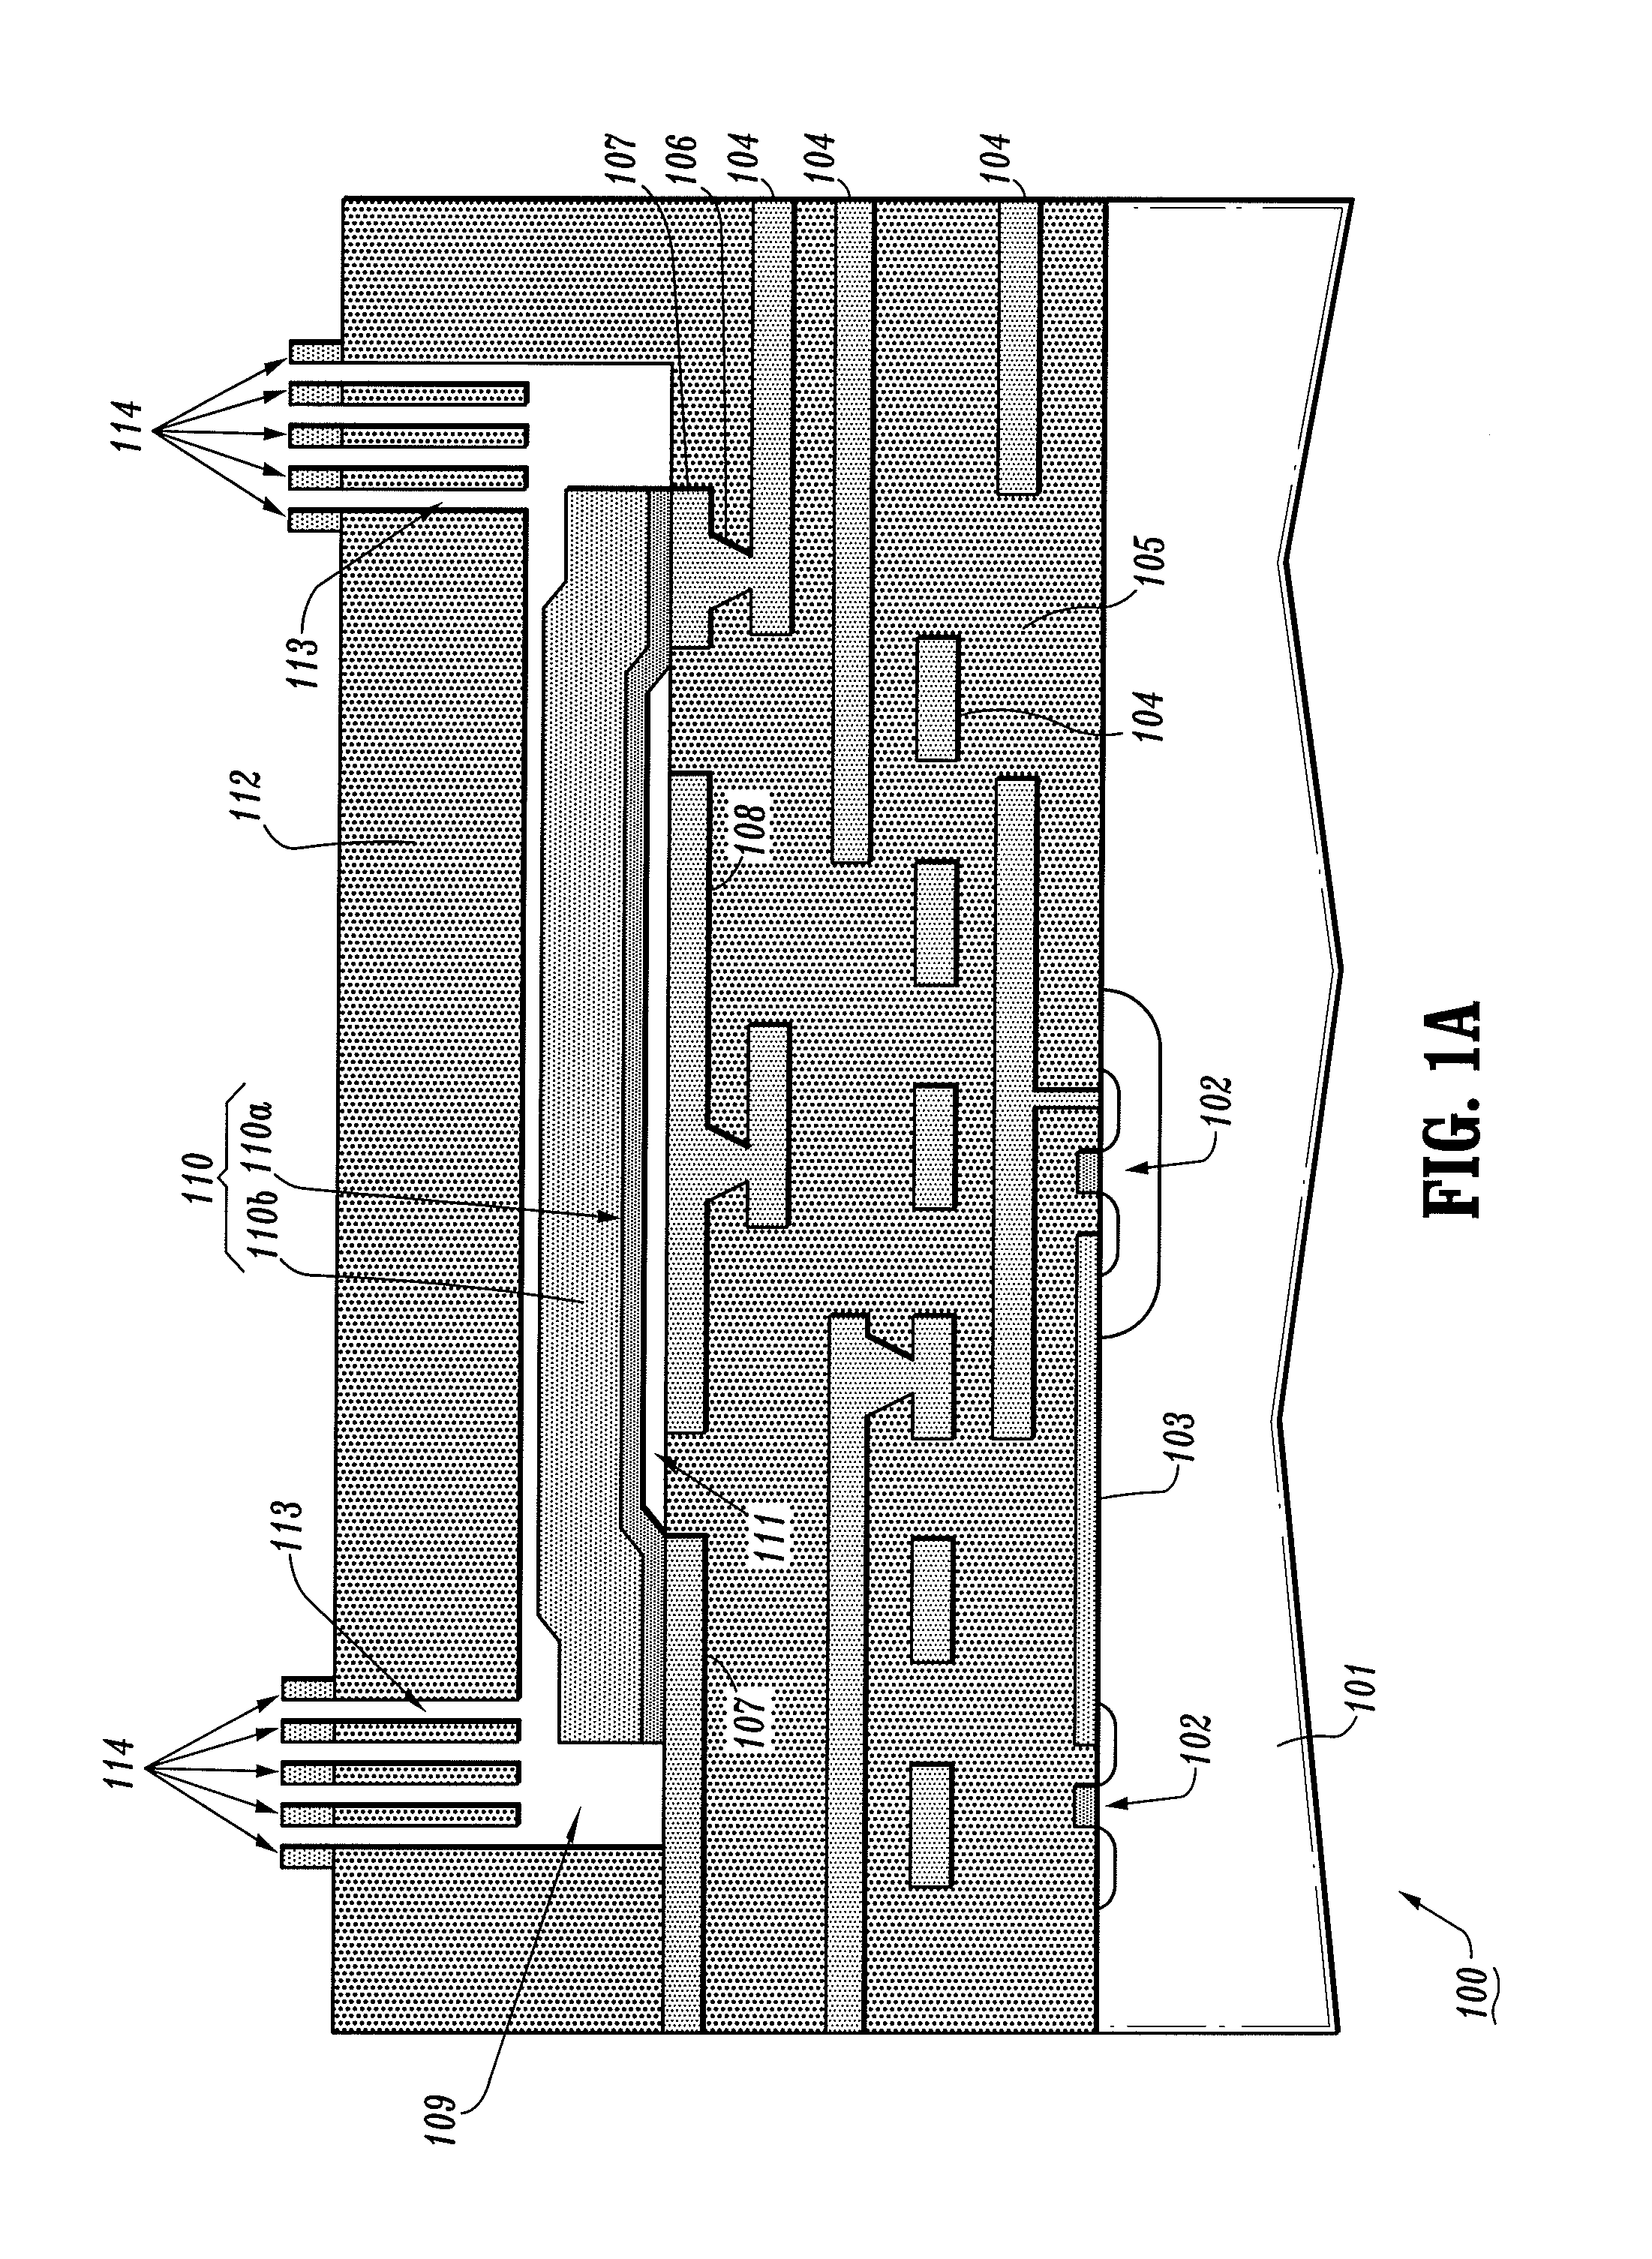 Apparatus and methods for encapsulating microelectromechanical (MEM) devices on a wafer scale